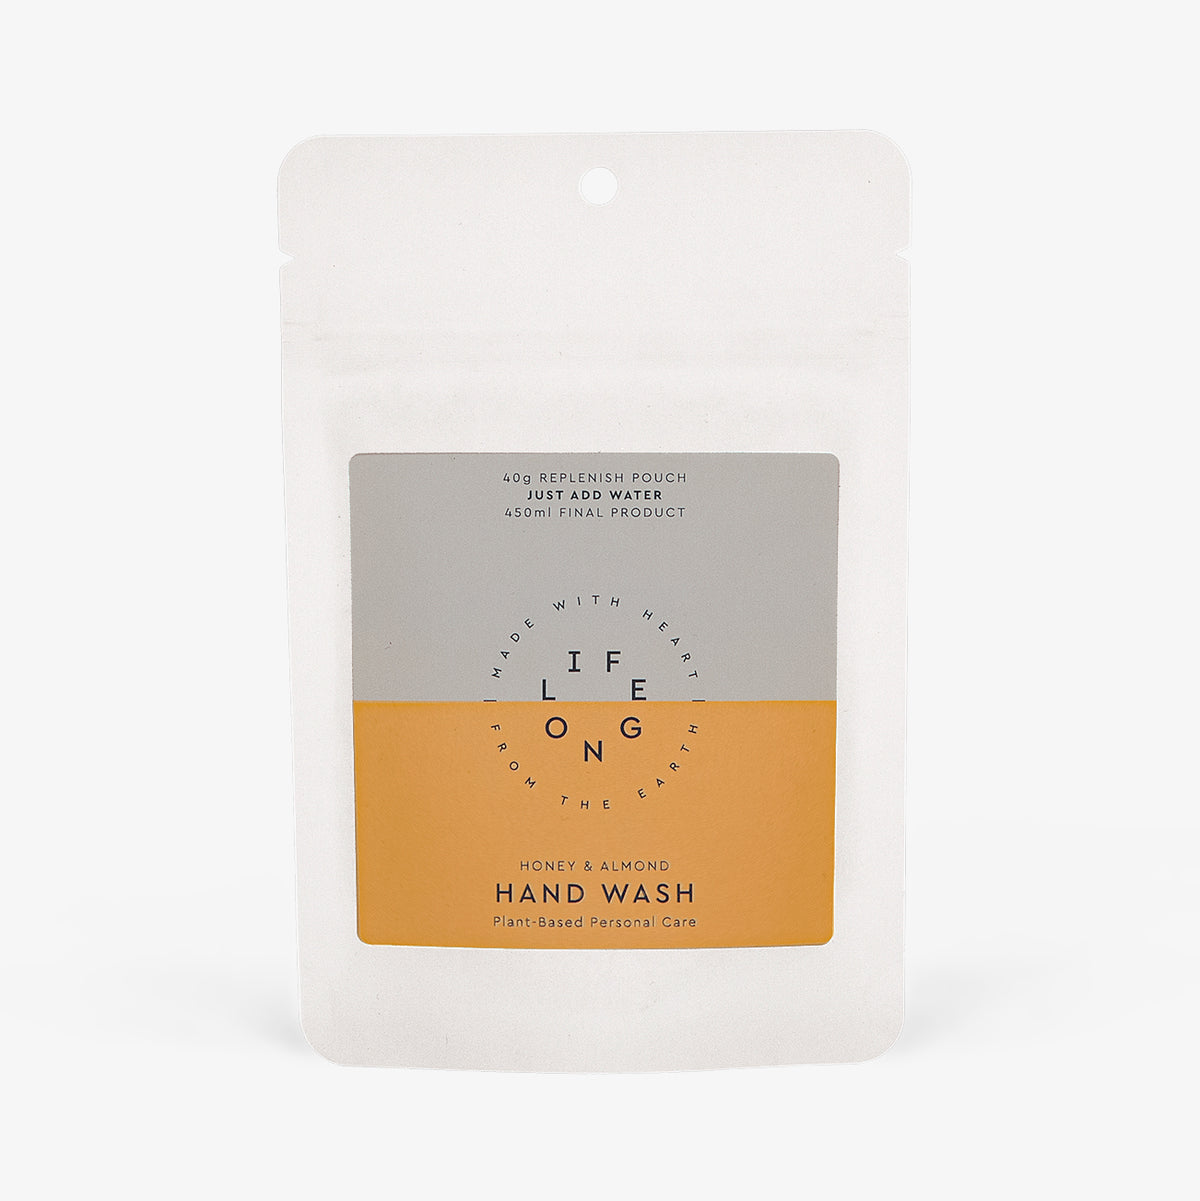 Hand Wash Replenishment Pouch - Honey and Almond